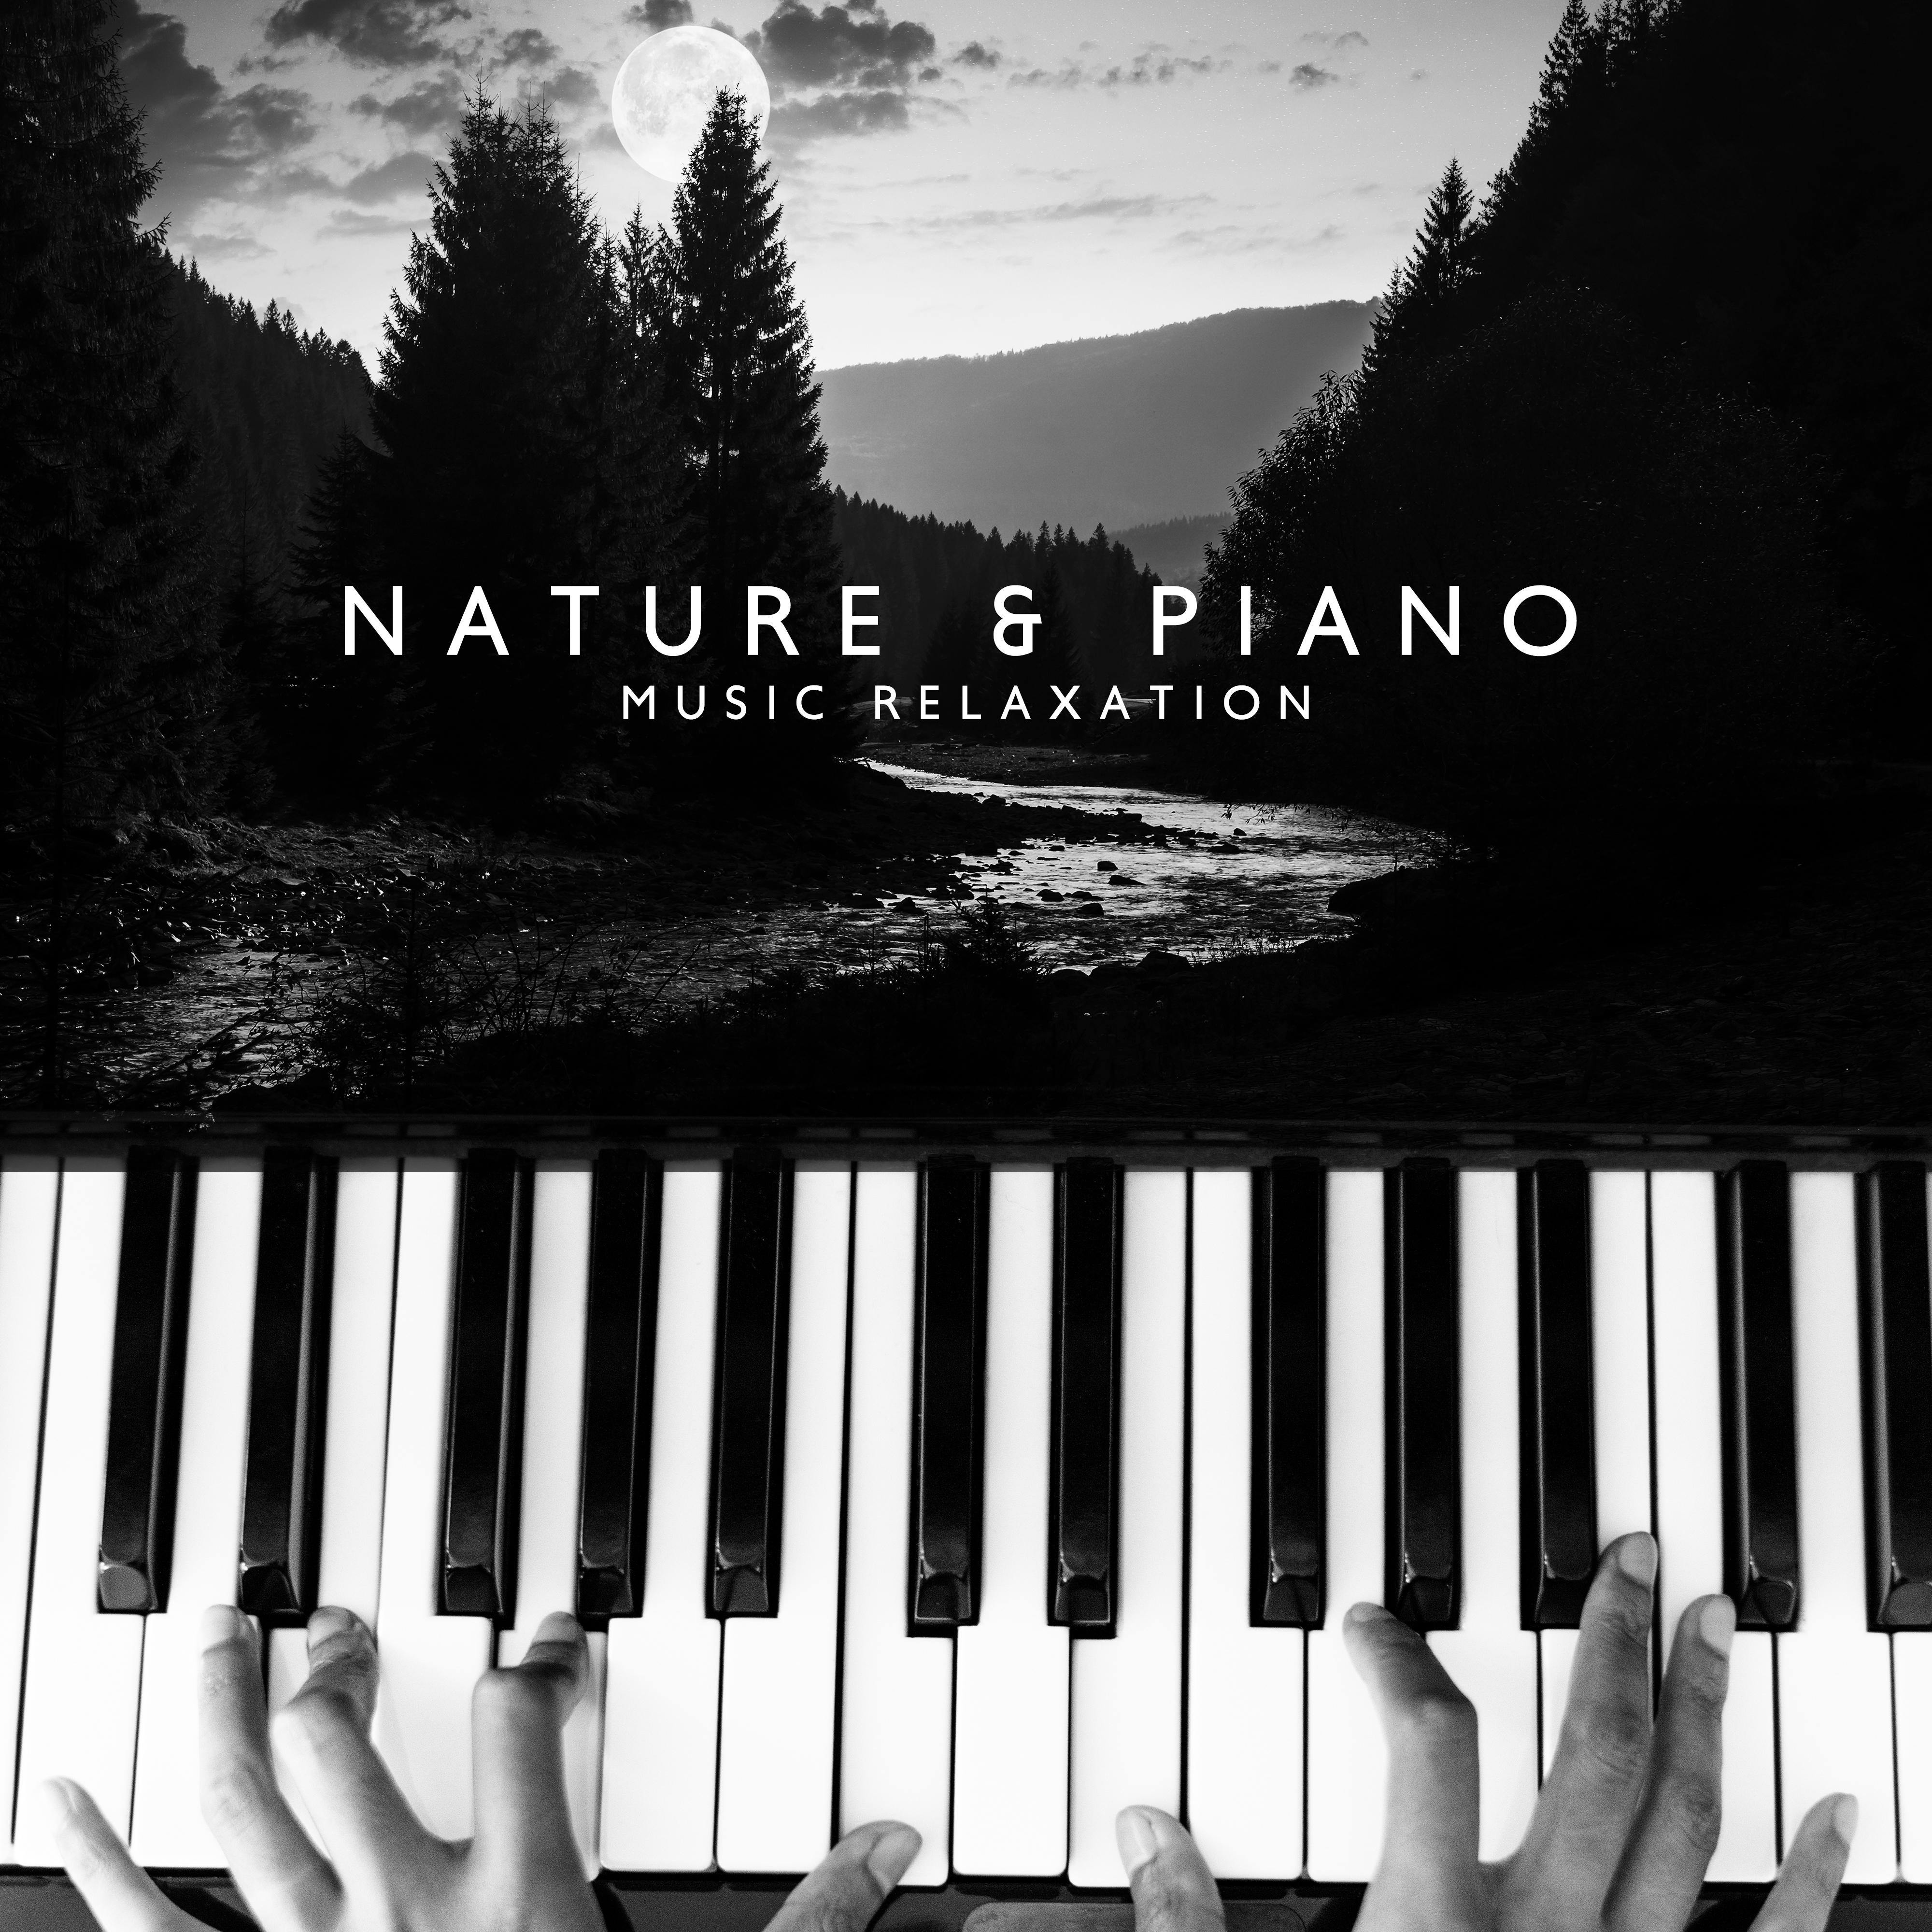 Nature & Piano Music Relaxation: New Age 15 Songs with Nature Sounds of Water, Birds, Forest, Wind for Relax, Calming Down & Stress Relief